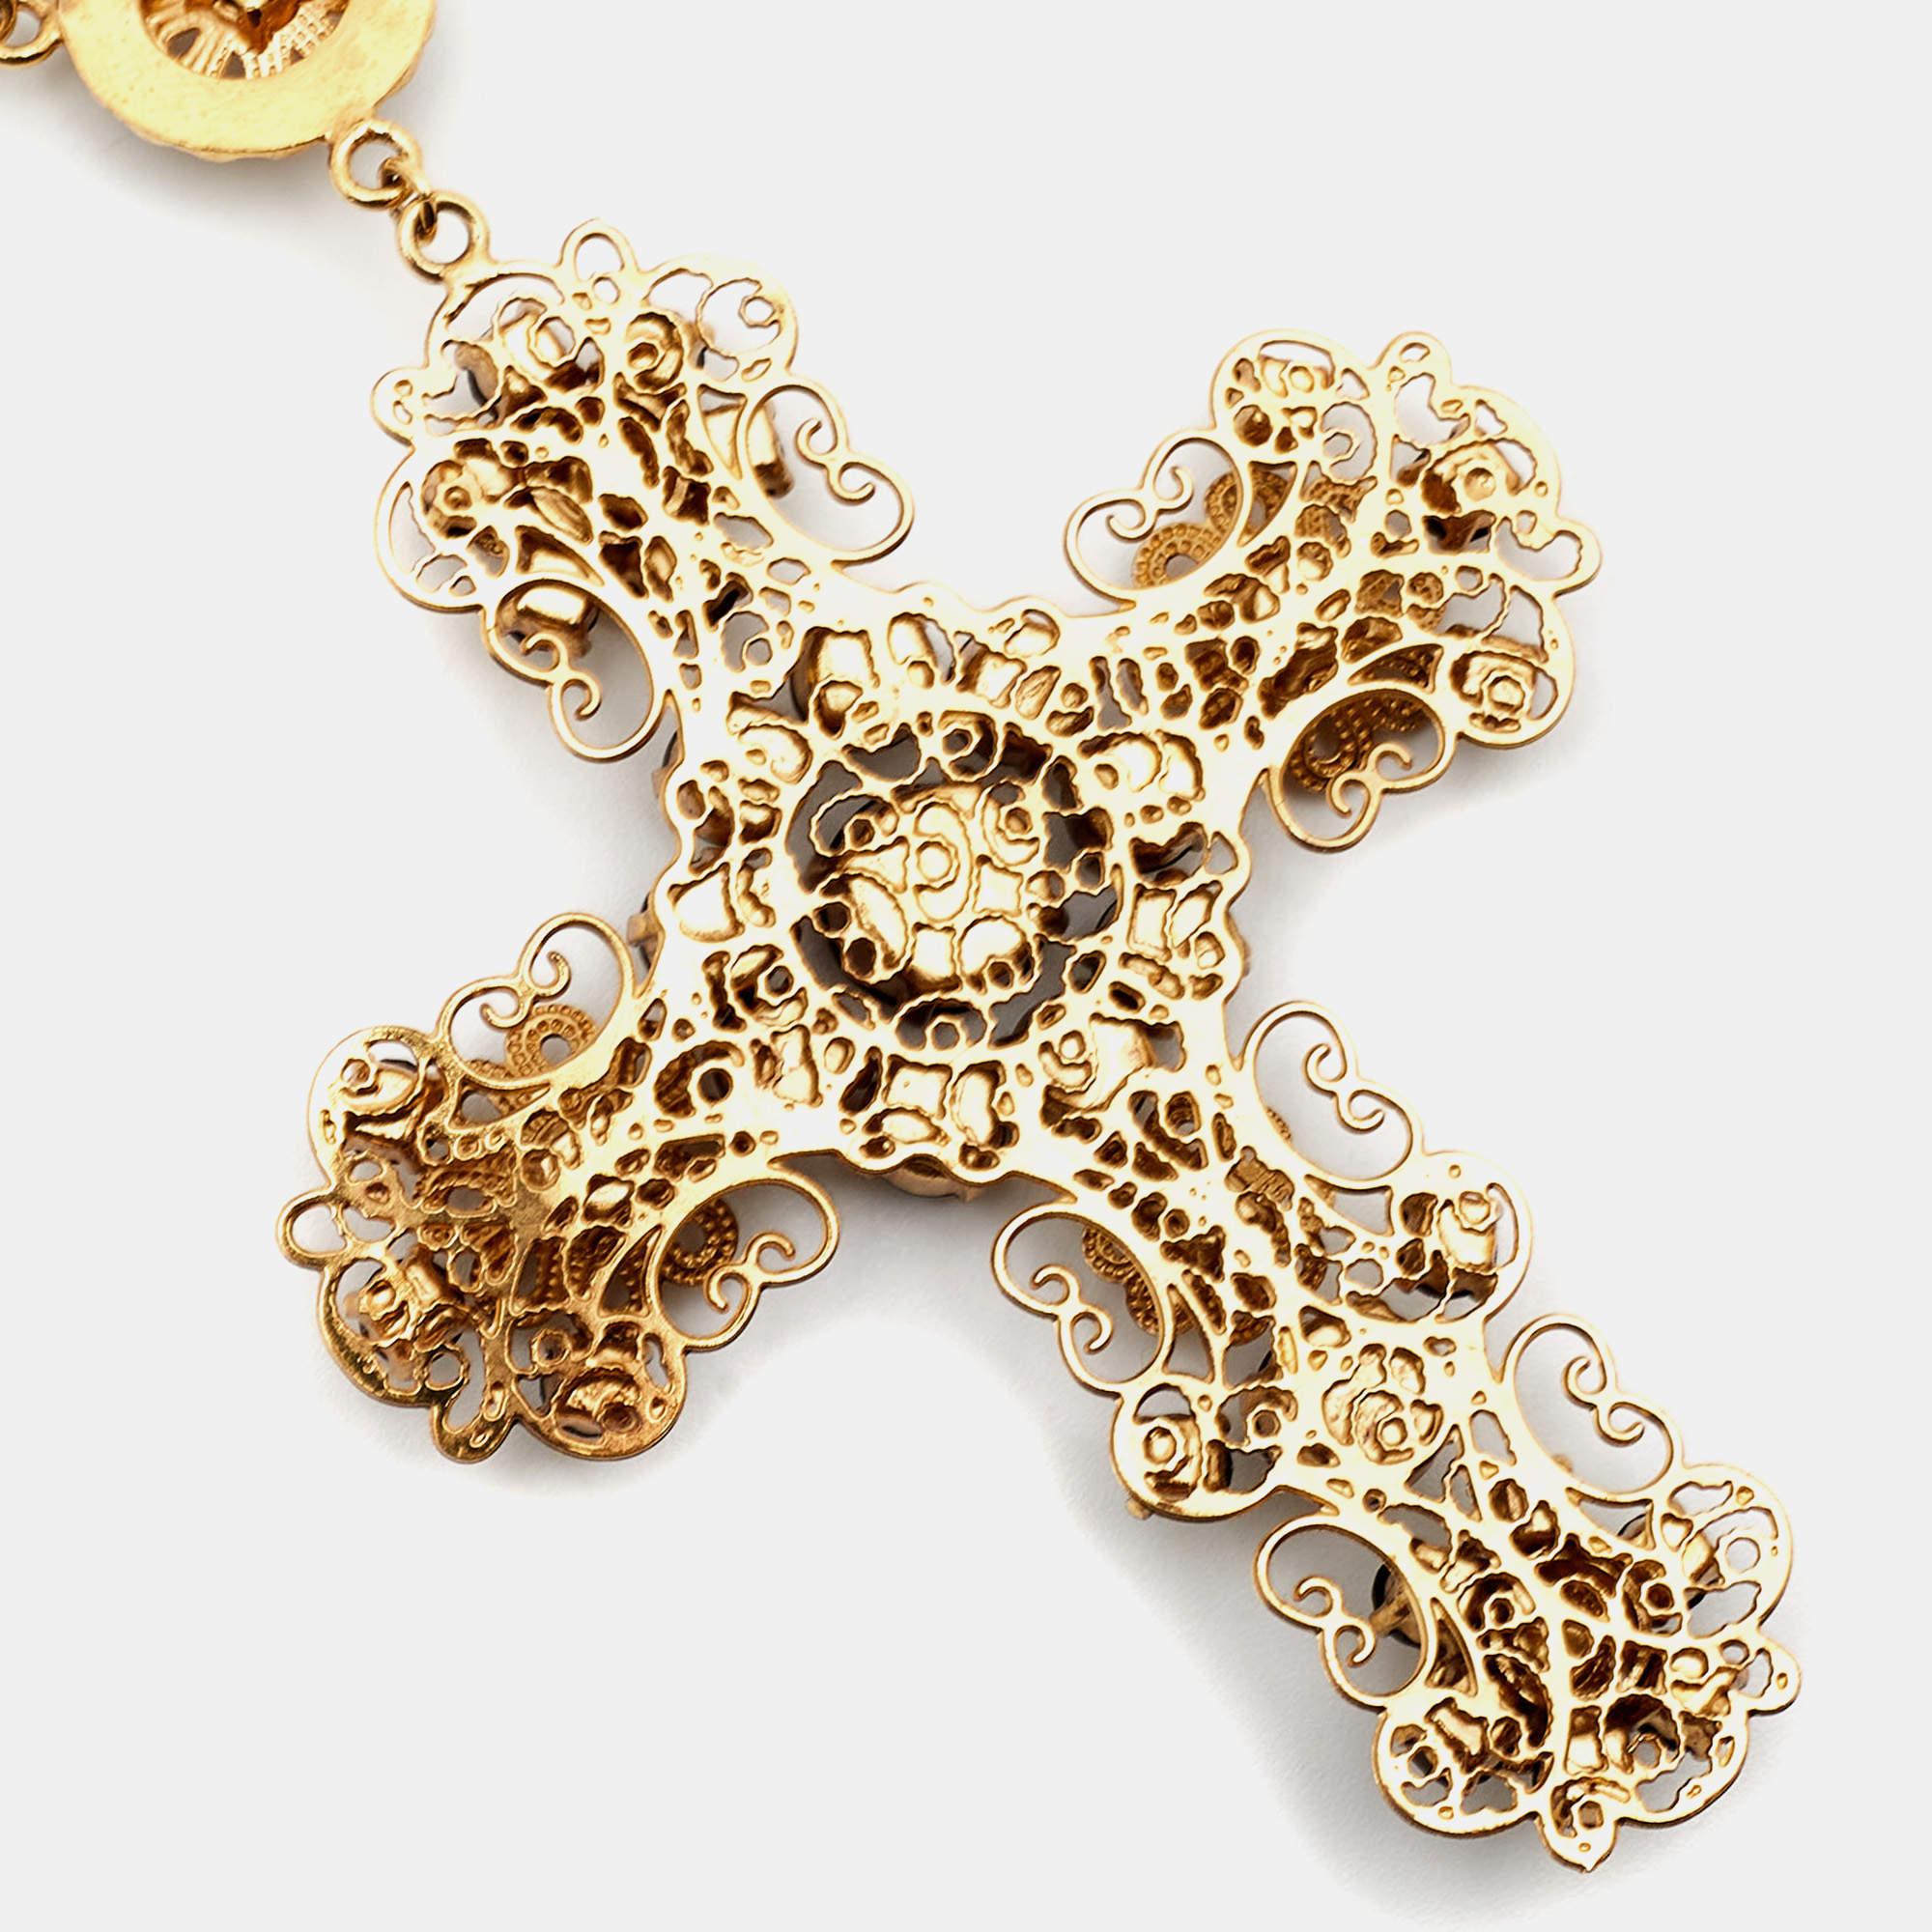 Uncut Dolce & Gabbana Filigree Crystal Beads Gold Tone Necklace For Sale